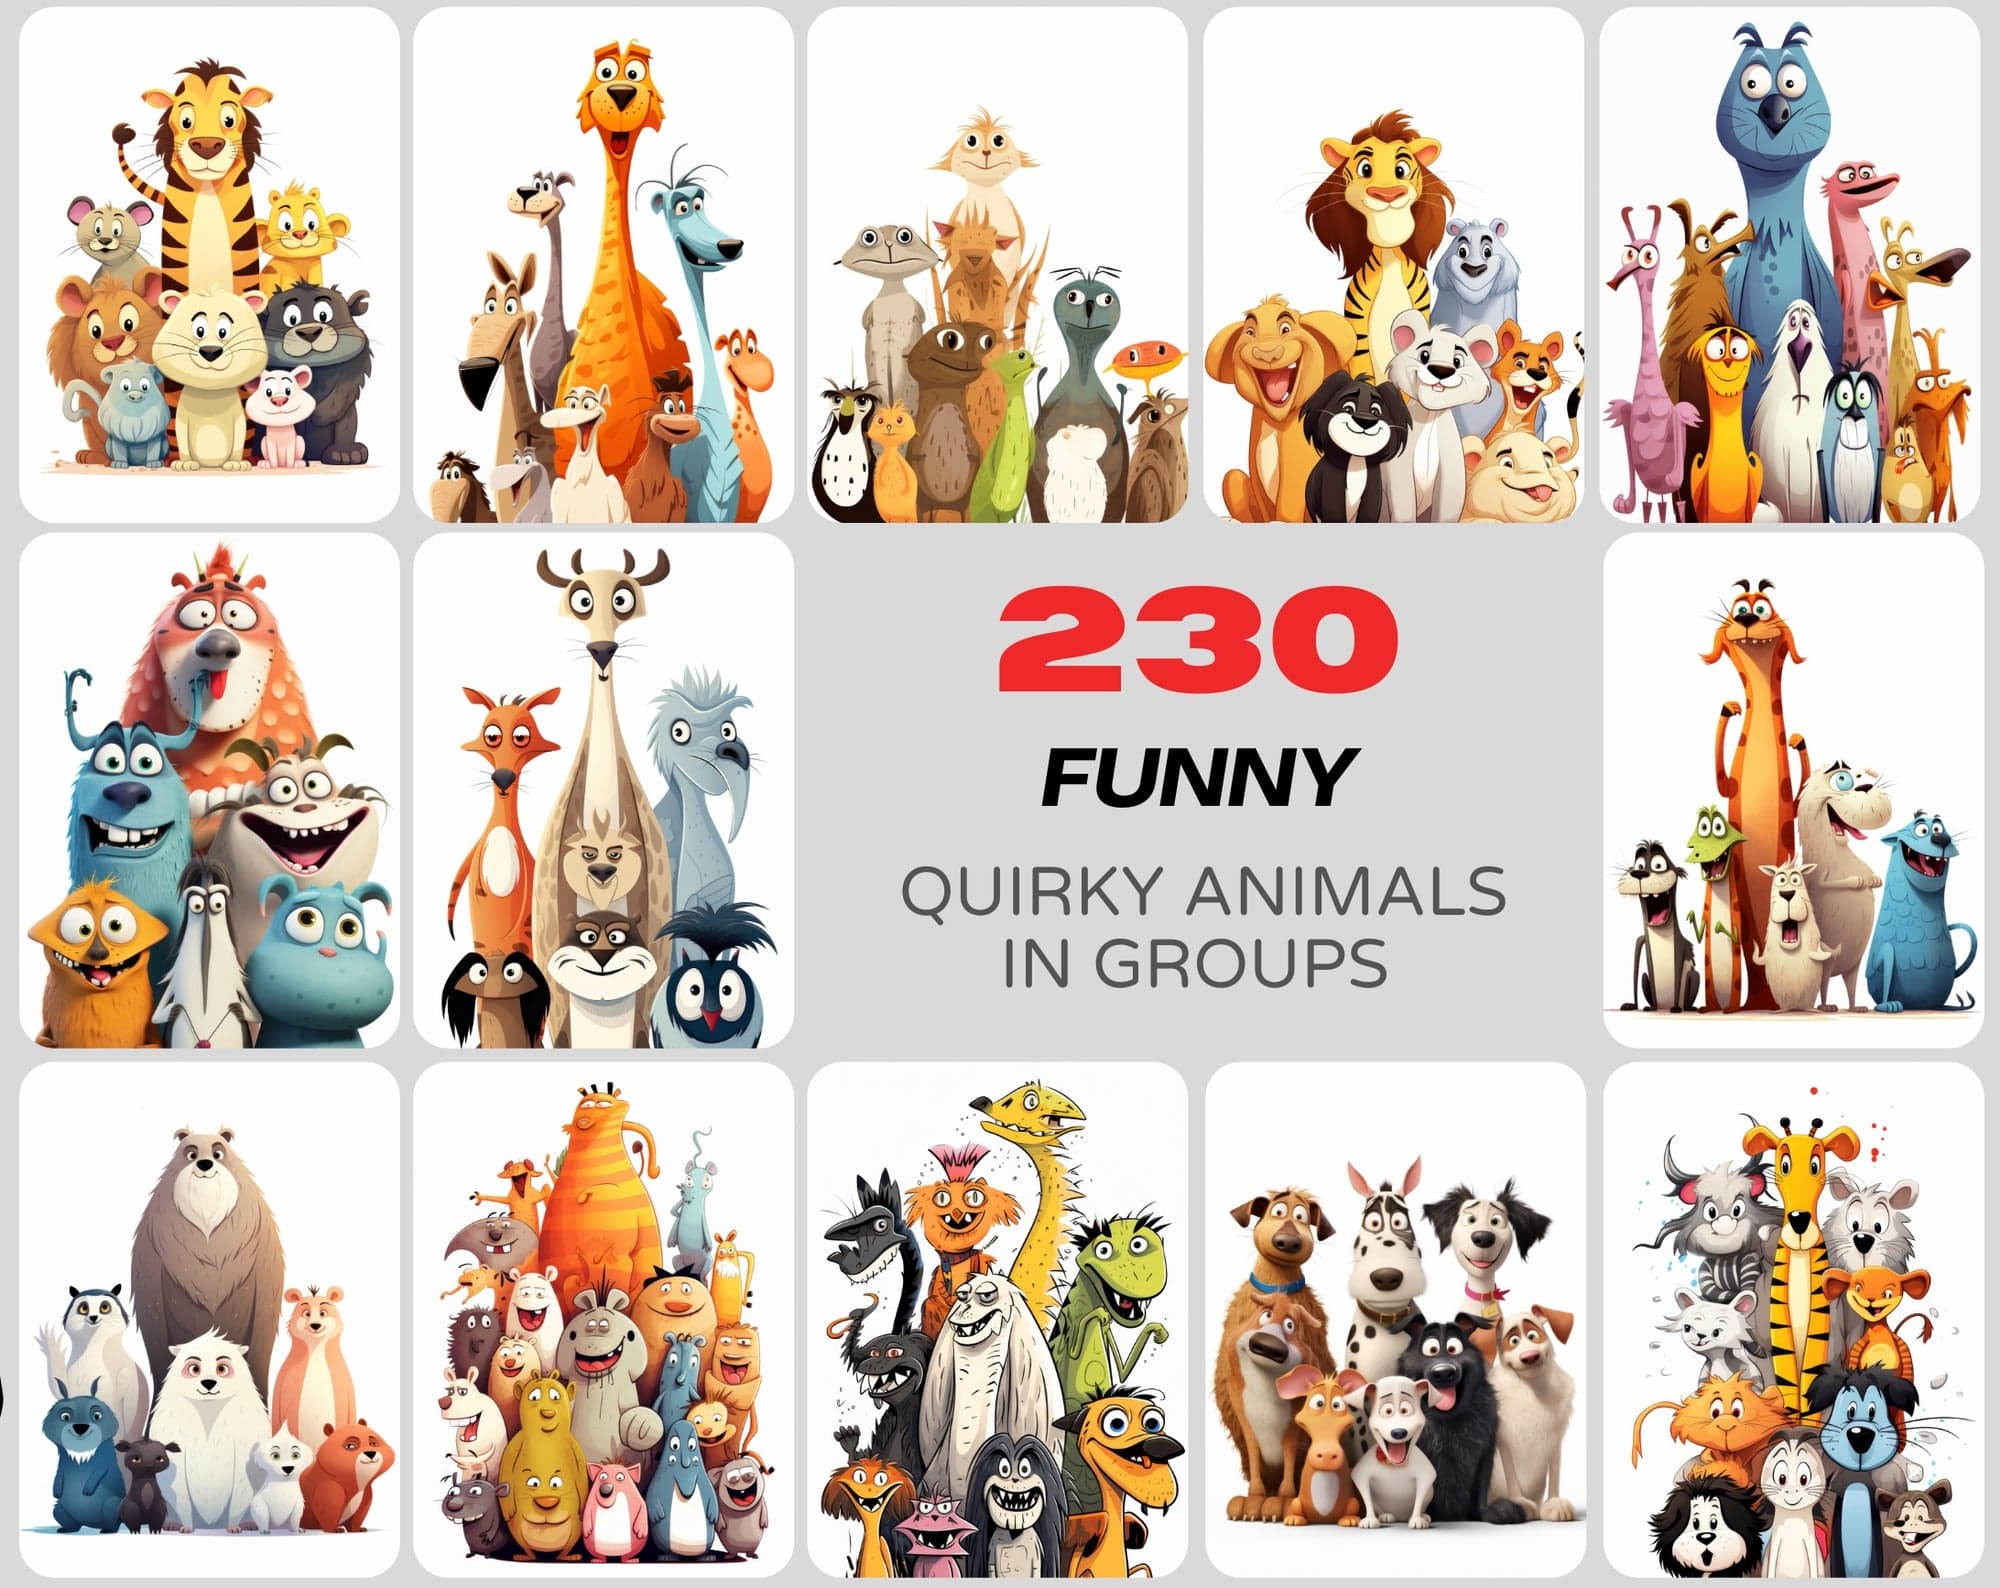 Quirky and Fun Animal Group Portraits Digital Download Sumobundle